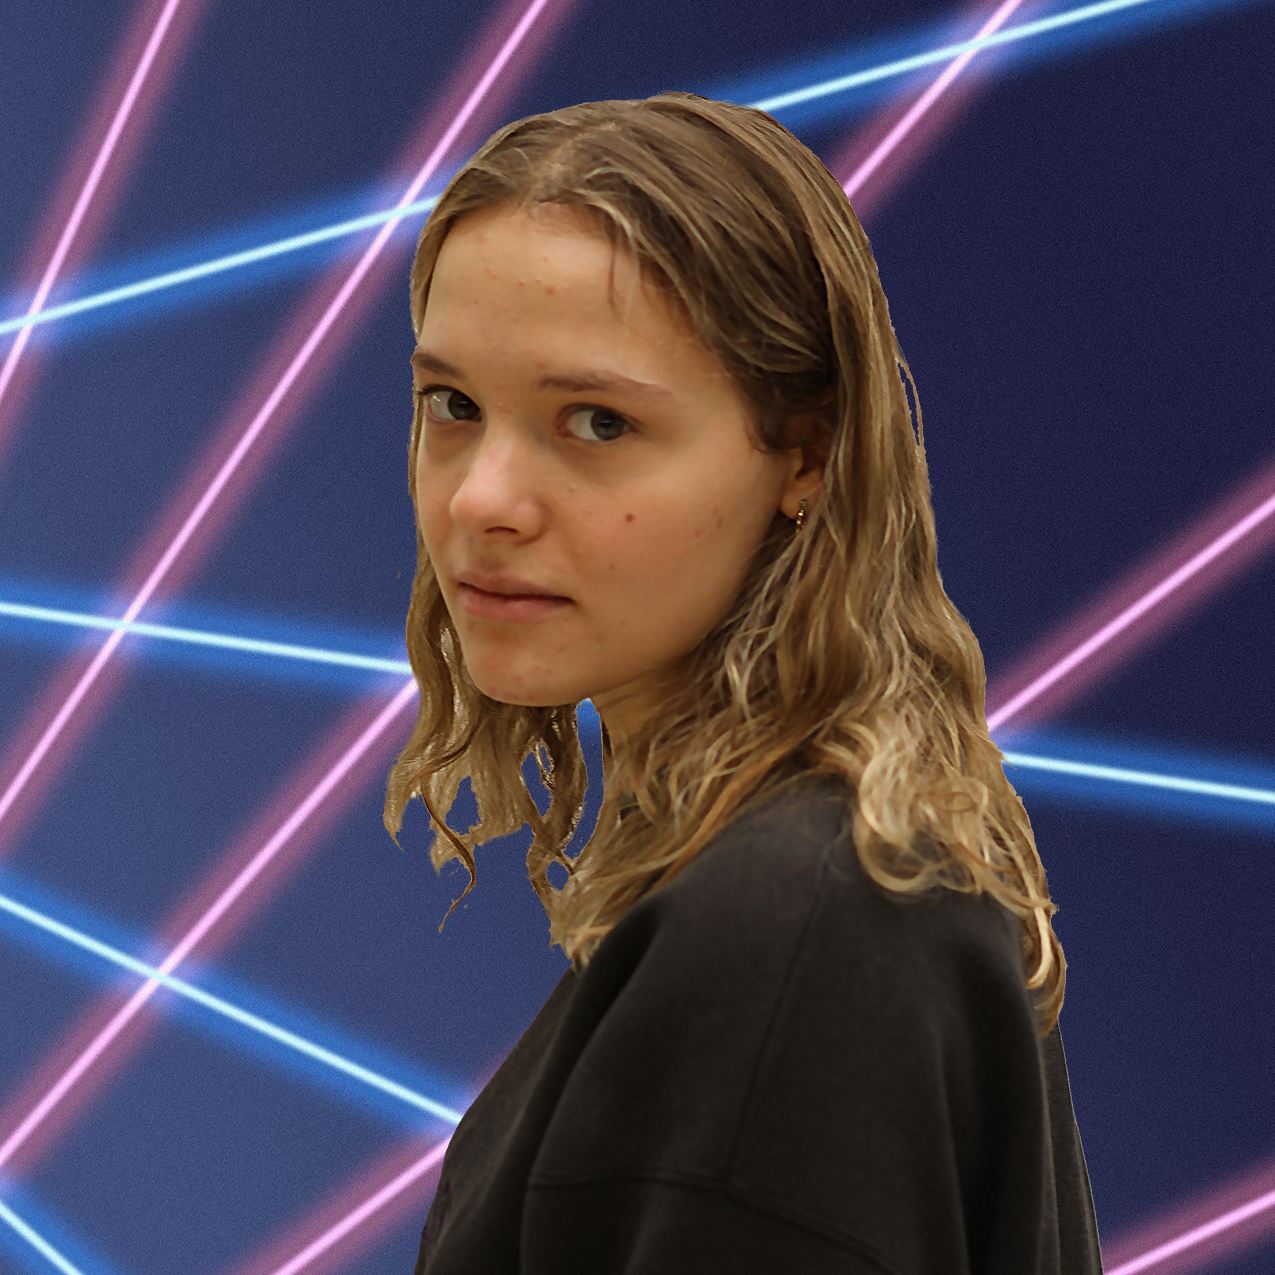 Anna in front of laser background